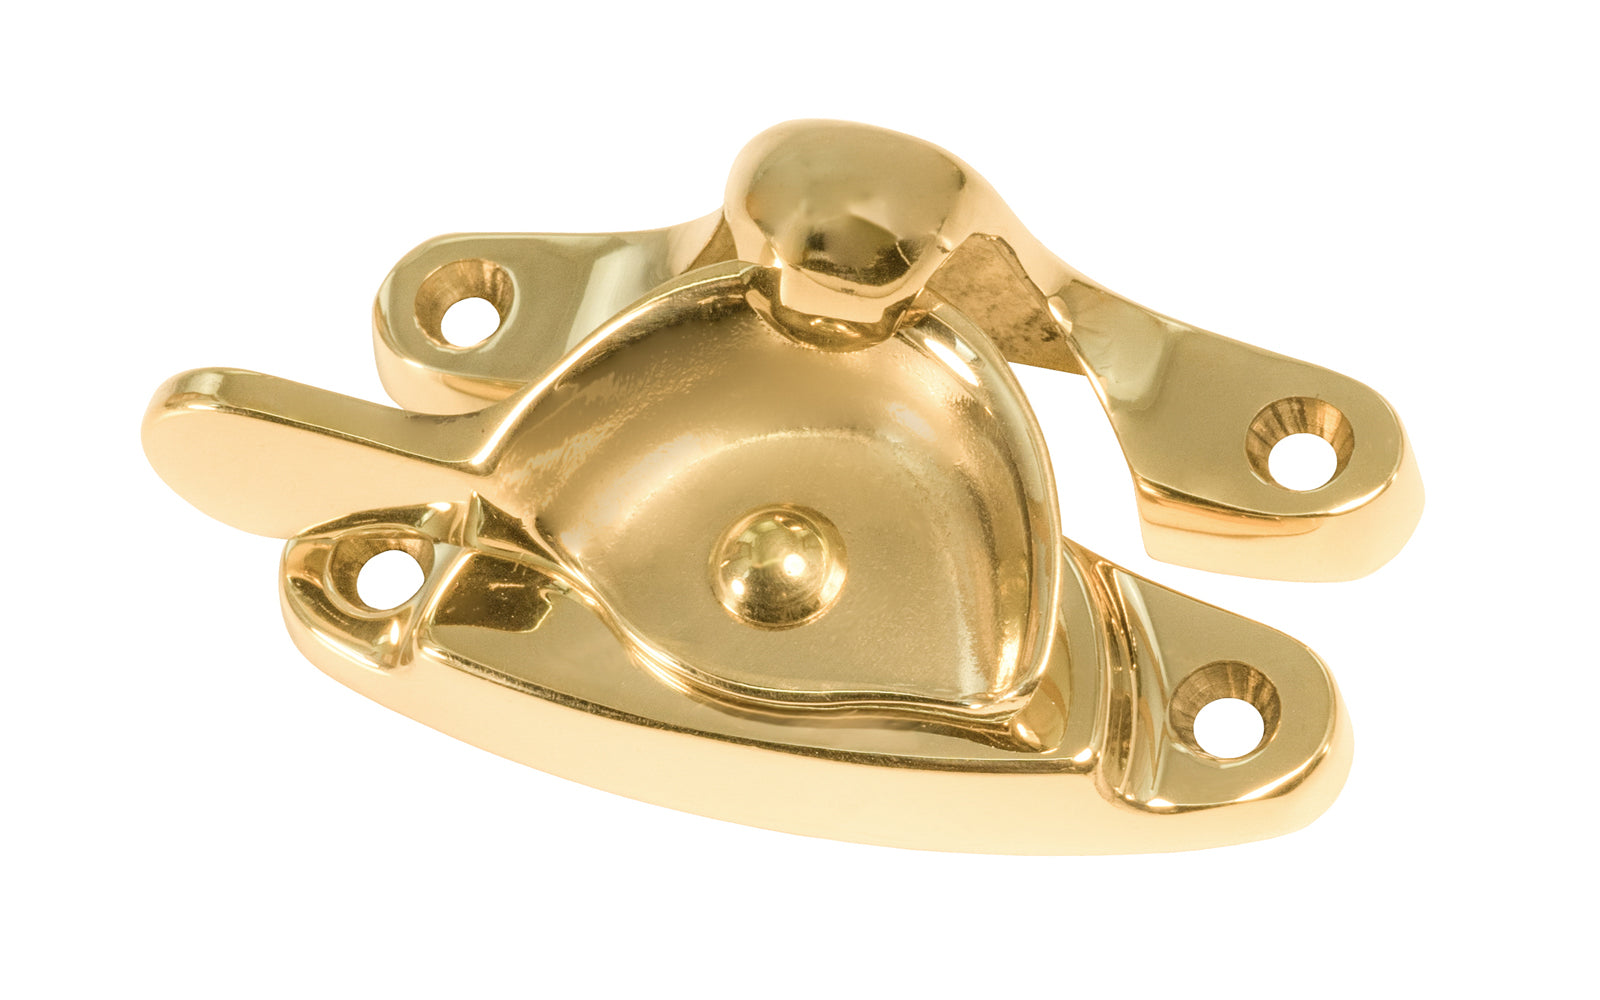 High quality & very popular classic solid brass crescent-style sash lock designed for hung or sash windows. Solid brass material with a durable pivot turn. 2-7/8